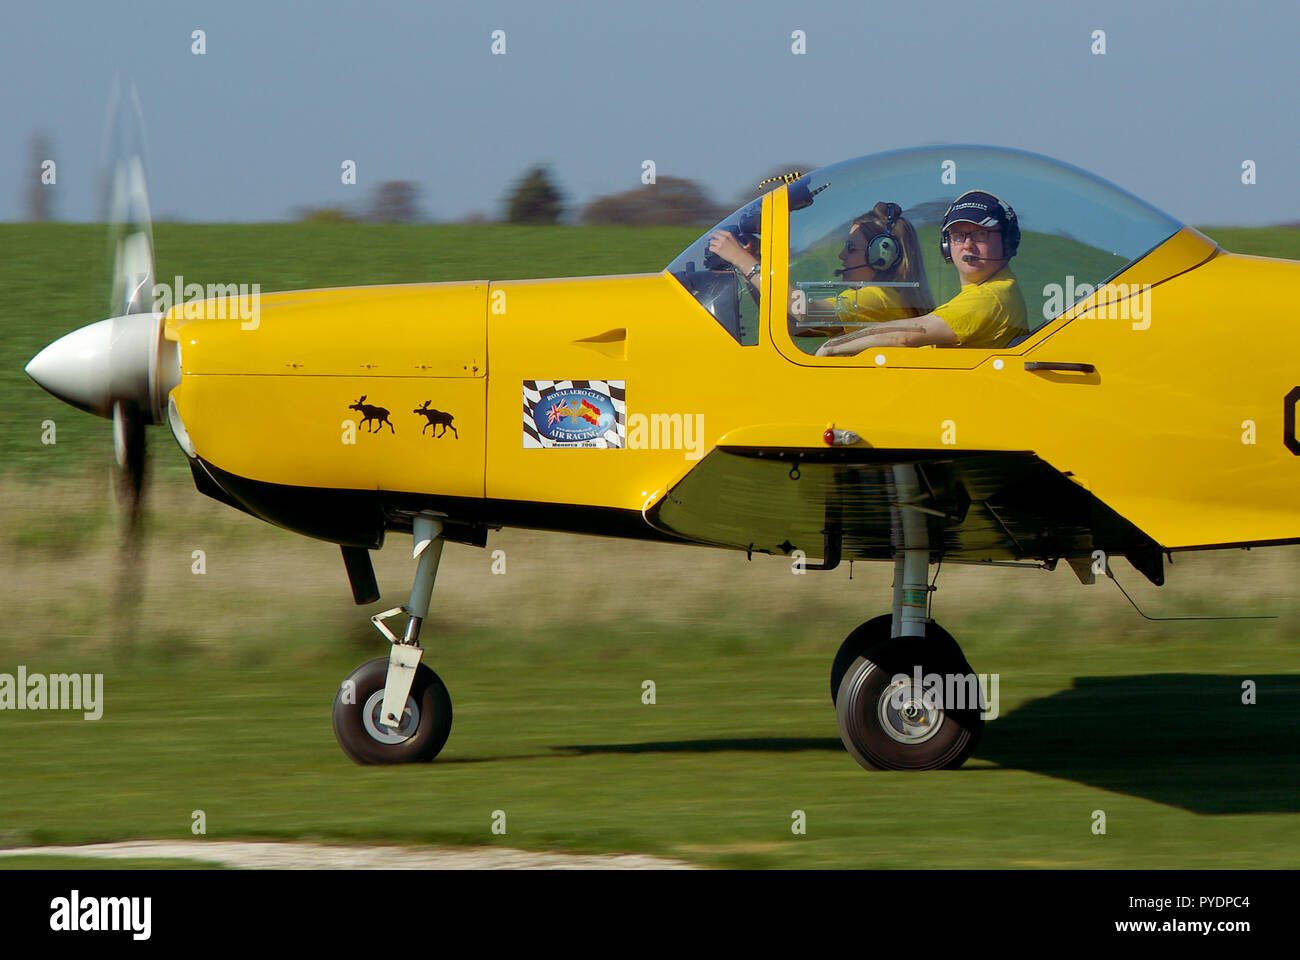 Slingsby T67 Firefly G-KONG taking part in Royal Aero Club RAeC Air Race Series at Great Oakley airfield, Essex, UK. Private flying Stock Photo